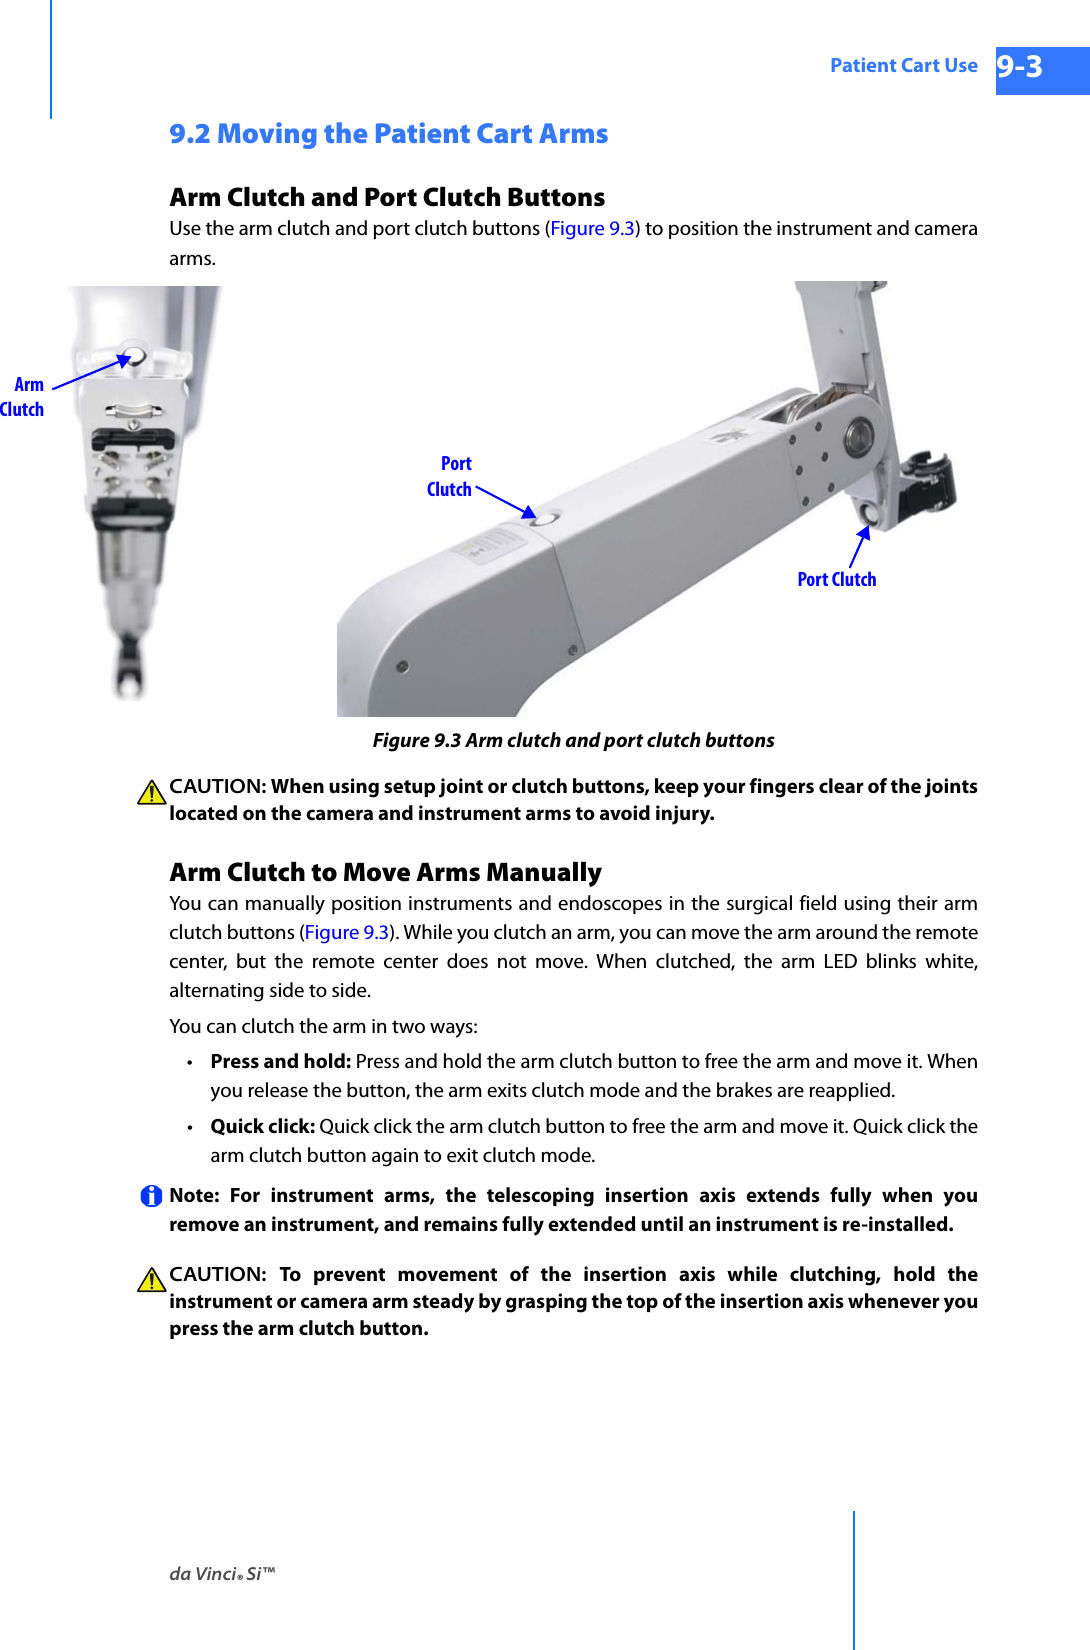 da Vinci® Si™Patient Cart Use 9-3DRAFT/PRE-RELEASE/CONFIDENTIAL 10/9/149.2 Moving the Patient Cart ArmsArm Clutch and Port Clutch Buttons Use the arm clutch and port clutch buttons (Figure 9.3) to position the instrument and camera arms. Figure 9.3 Arm clutch and port clutch buttonsCAUTION: When using setup joint or clutch buttons, keep your fingers clear of the joints located on the camera and instrument arms to avoid injury.Arm Clutch to Move Arms ManuallyYou can manually position instruments and endoscopes in the surgical field using their arm clutch buttons (Figure 9.3). While you clutch an arm, you can move the arm around the remote center, but the remote center does not move. When clutched, the arm LED blinks white, alternating side to side.You can clutch the arm in two ways: •Press and hold: Press and hold the arm clutch button to free the arm and move it. When you release the button, the arm exits clutch mode and the brakes are reapplied. •Quick click: Quick click the arm clutch button to free the arm and move it. Quick click the arm clutch button again to exit clutch mode. Note: For instrument arms, the telescoping insertion axis extends fully when you remove an instrument, and remains fully extended until an instrument is re-installed.CAUTION:  To prevent movement of the insertion axis while clutching, hold the instrument or camera arm steady by grasping the top of the insertion axis whenever you press the arm clutch button.ArmClutchPortClutchPort Clutch